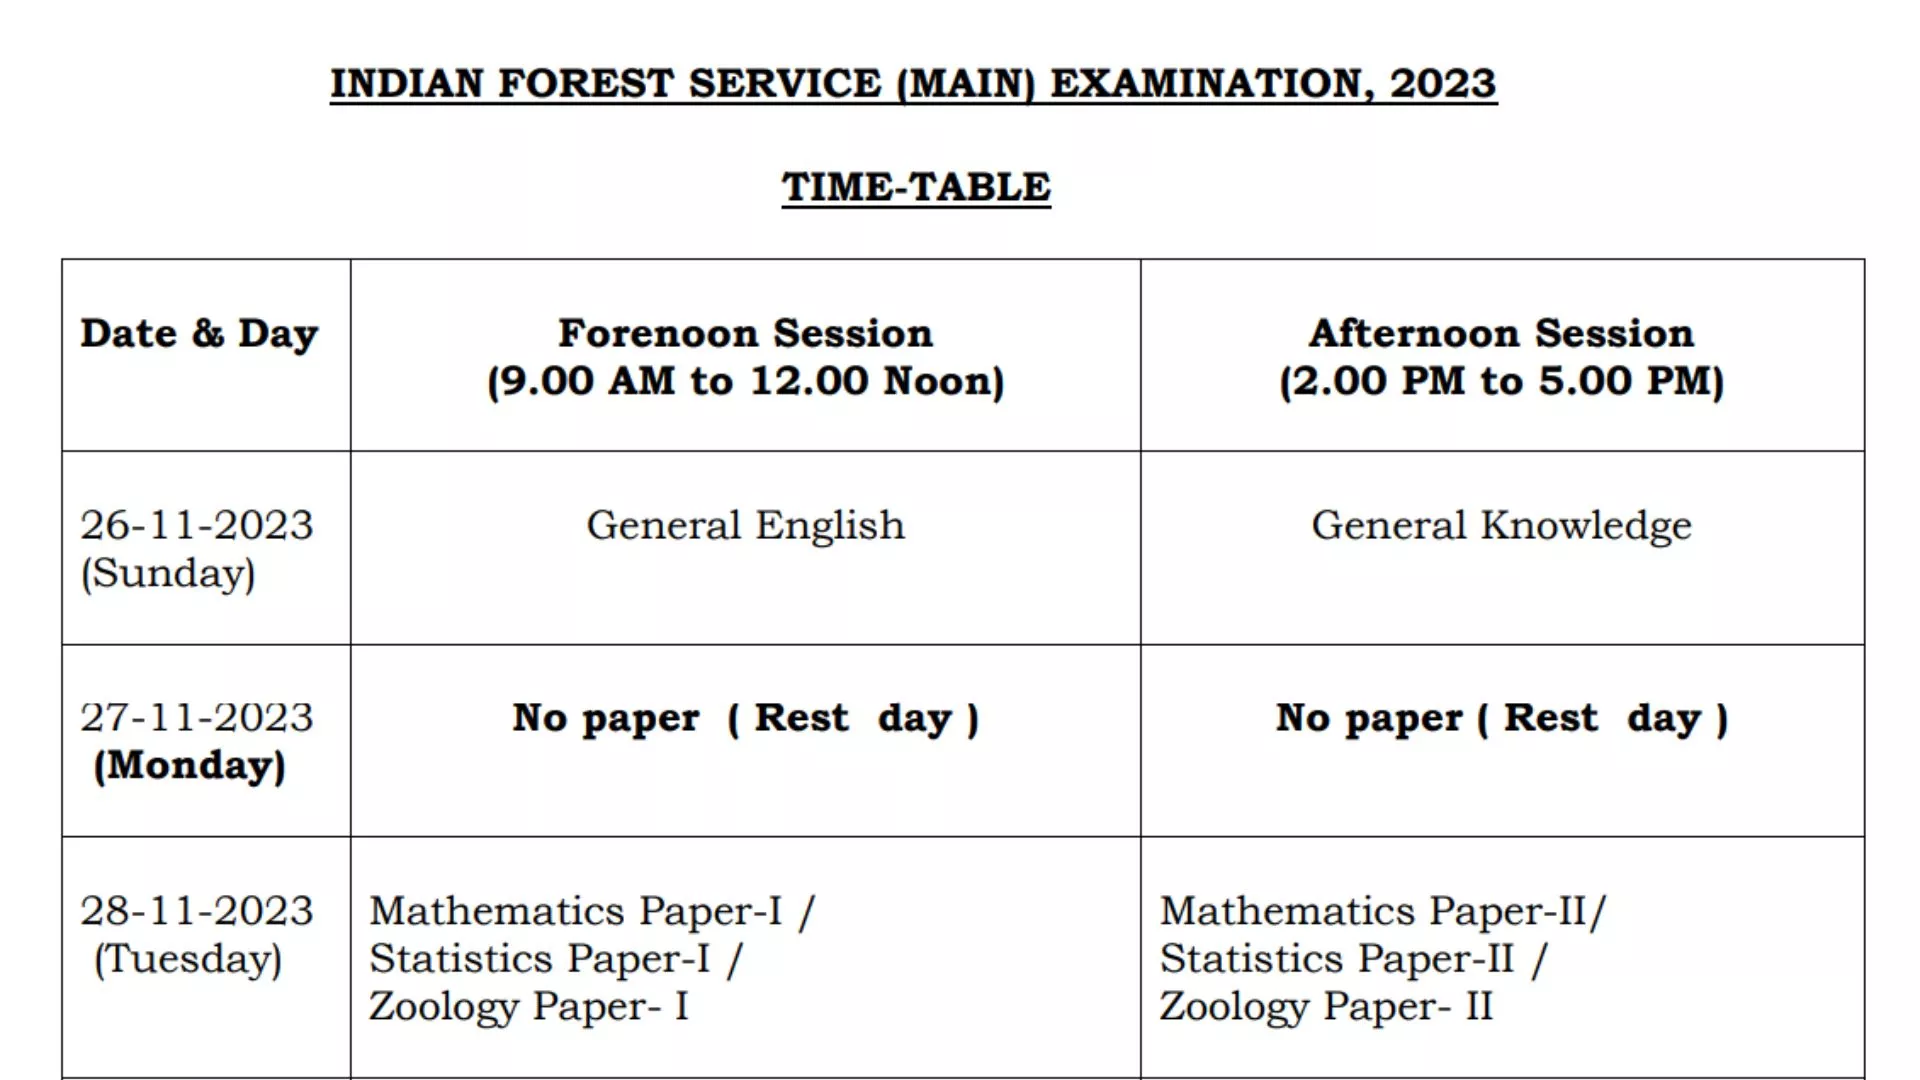 UPSC Indian Forest Service (Main) Examination 2023 Schedule Released [Download PDF]